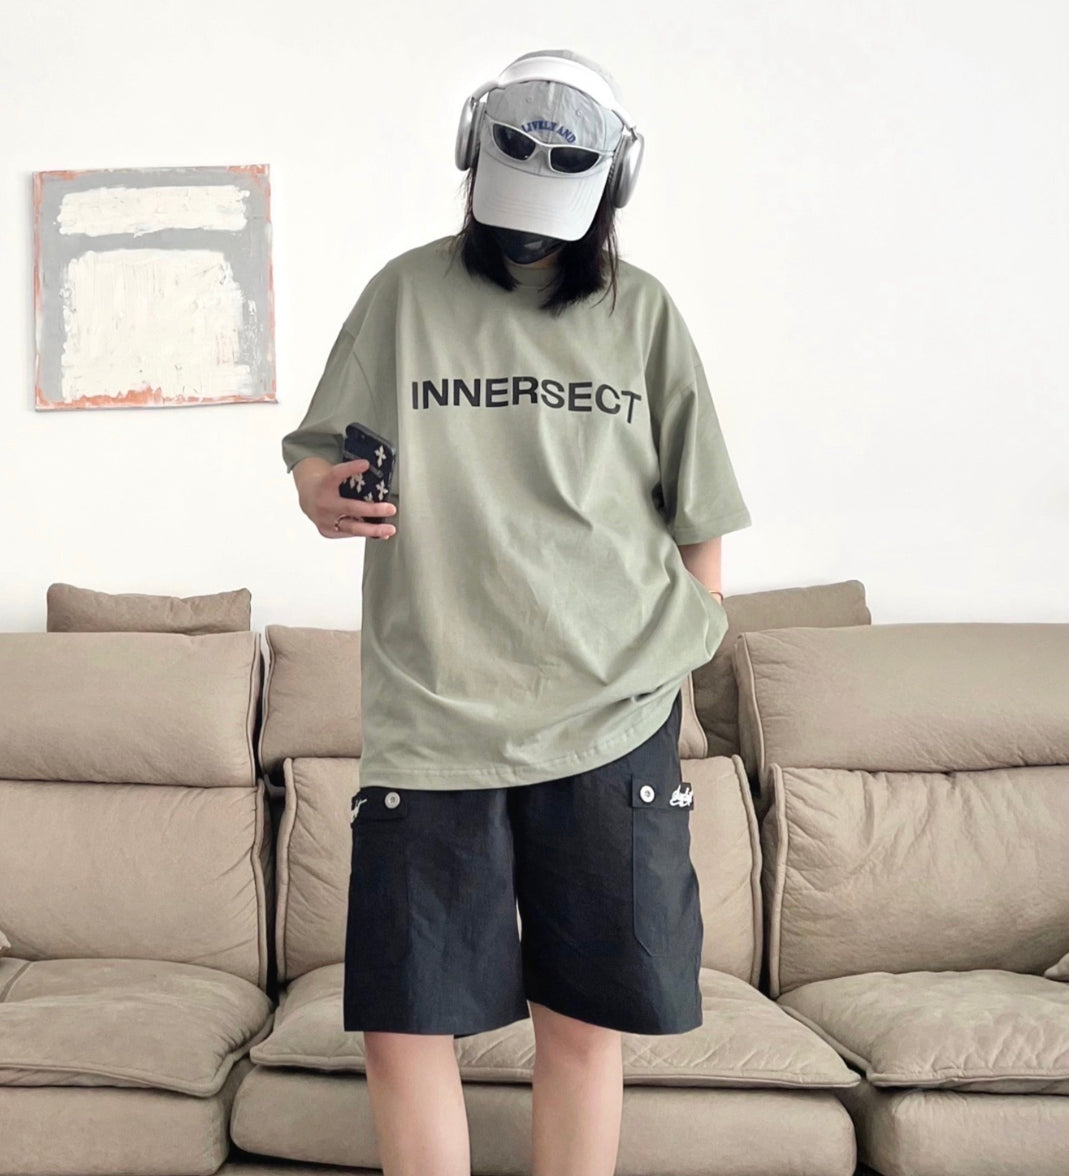 Innersect Front Logo Tee